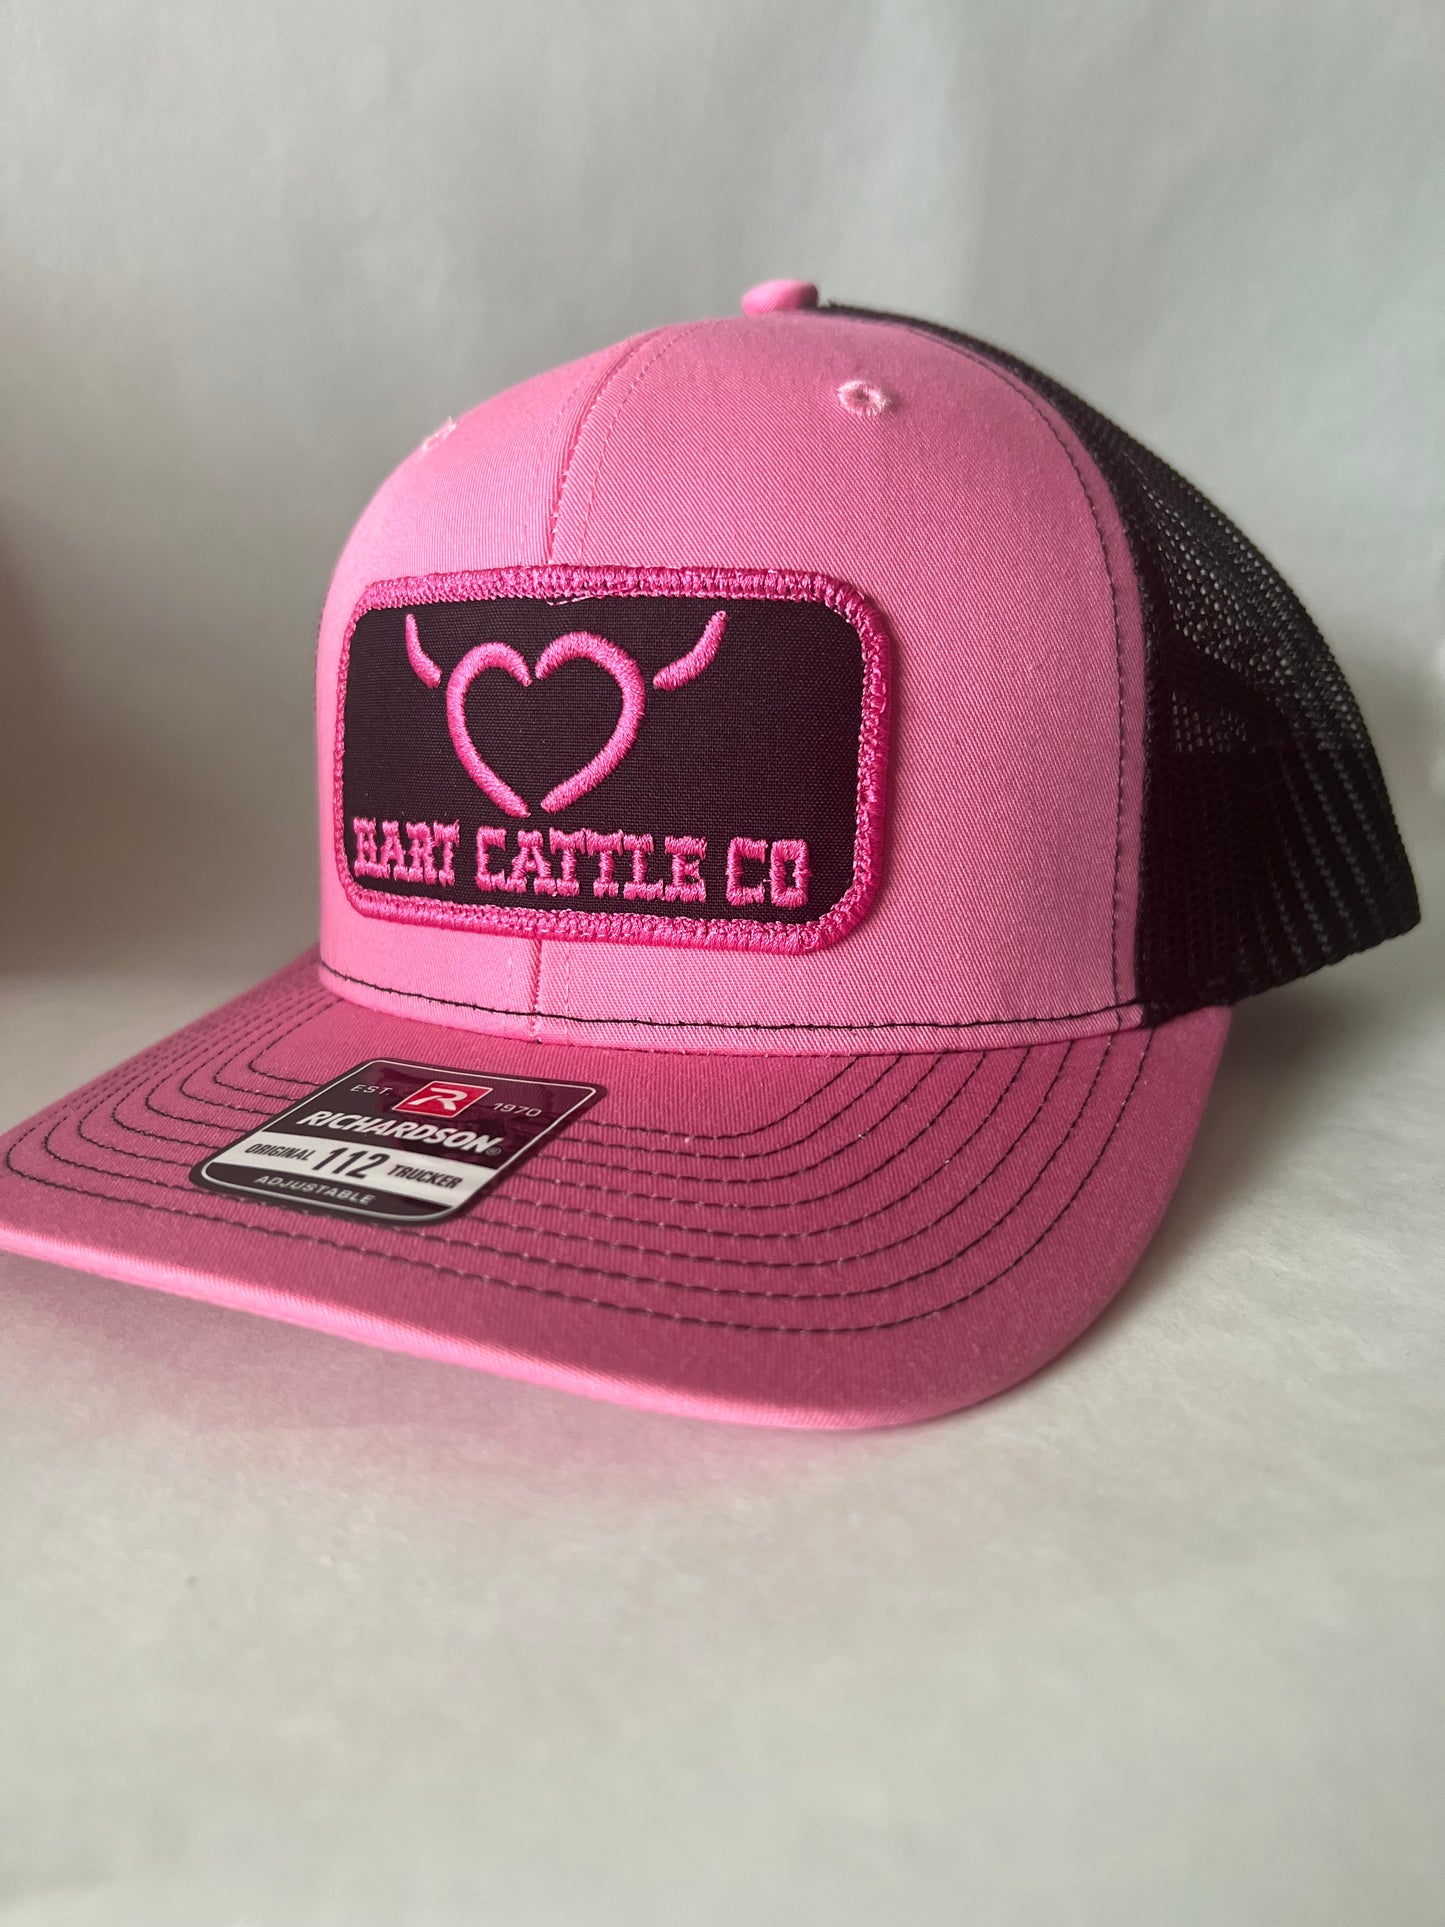 Hart Cattle Co. Patch Pink and Black